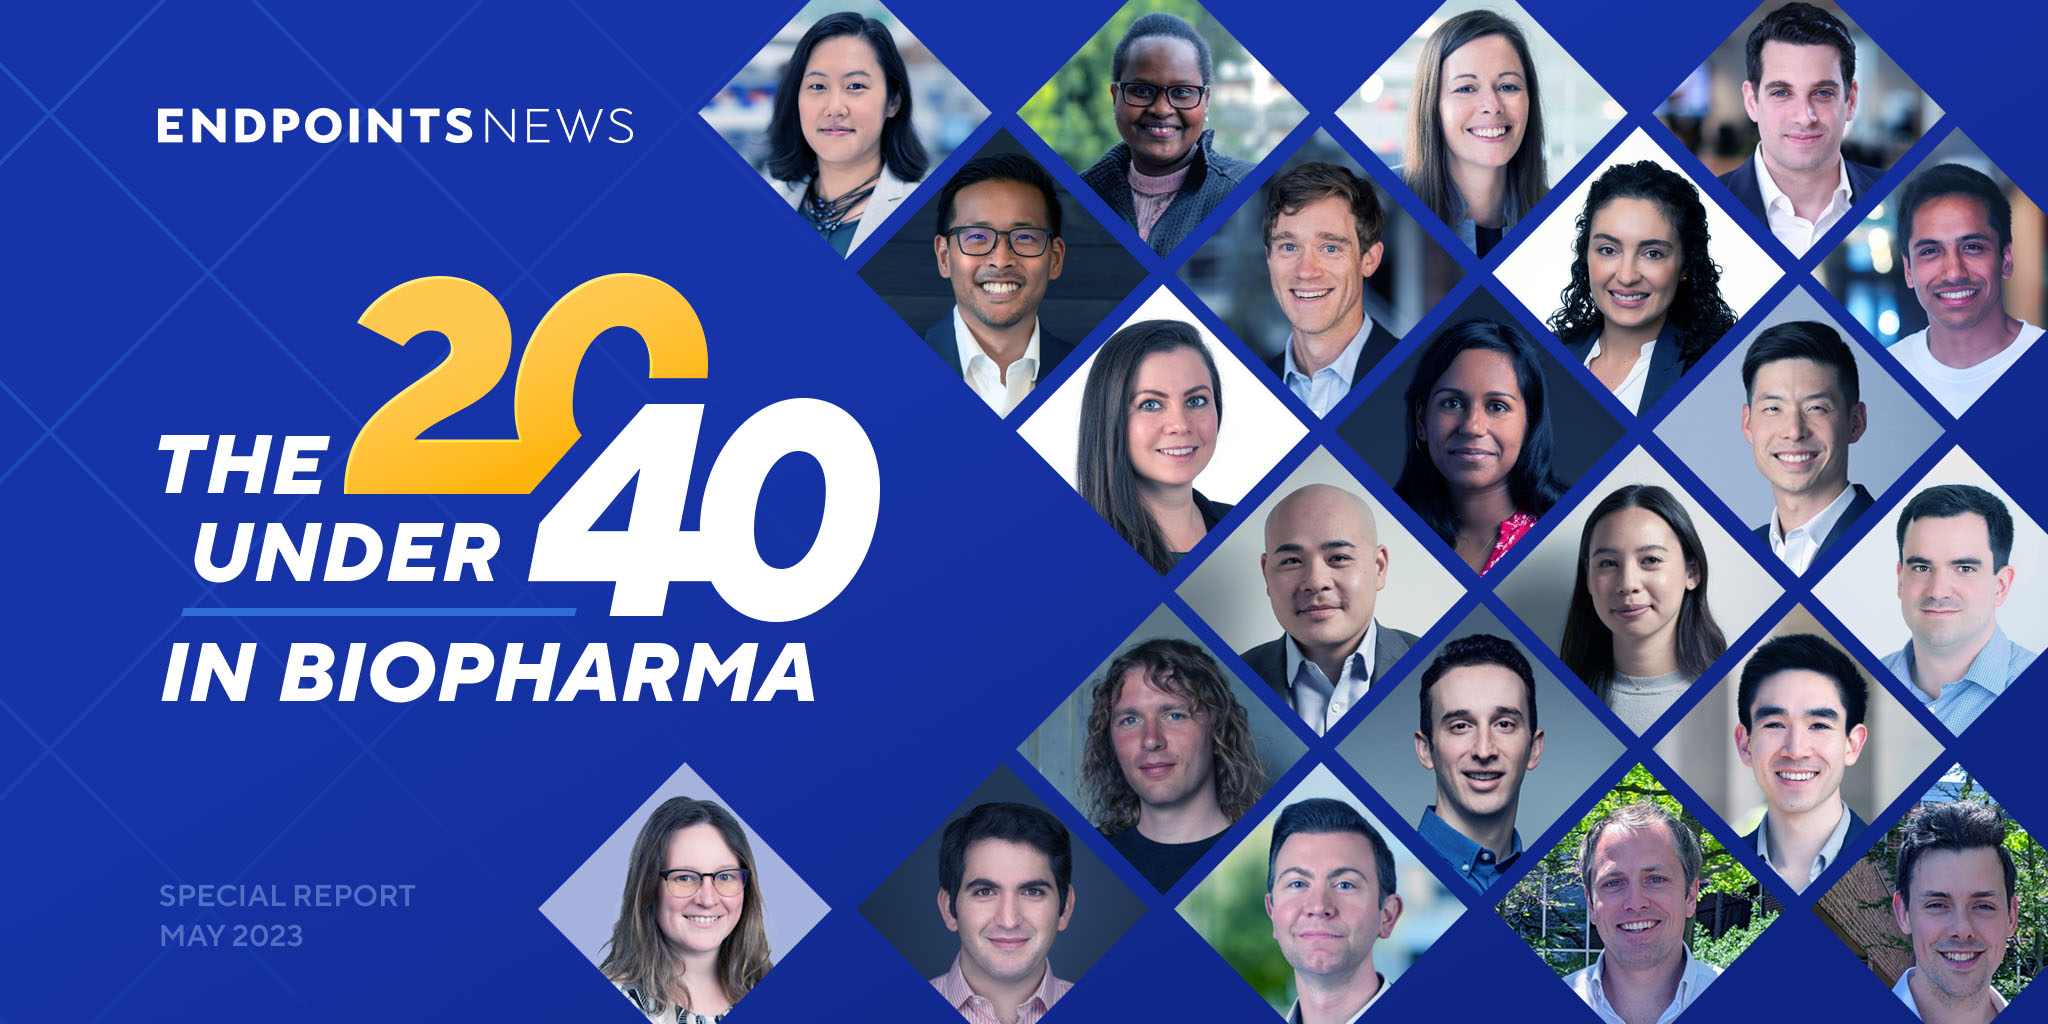 Co-founders recognized in Endpoints News’ “20 Under 40” list